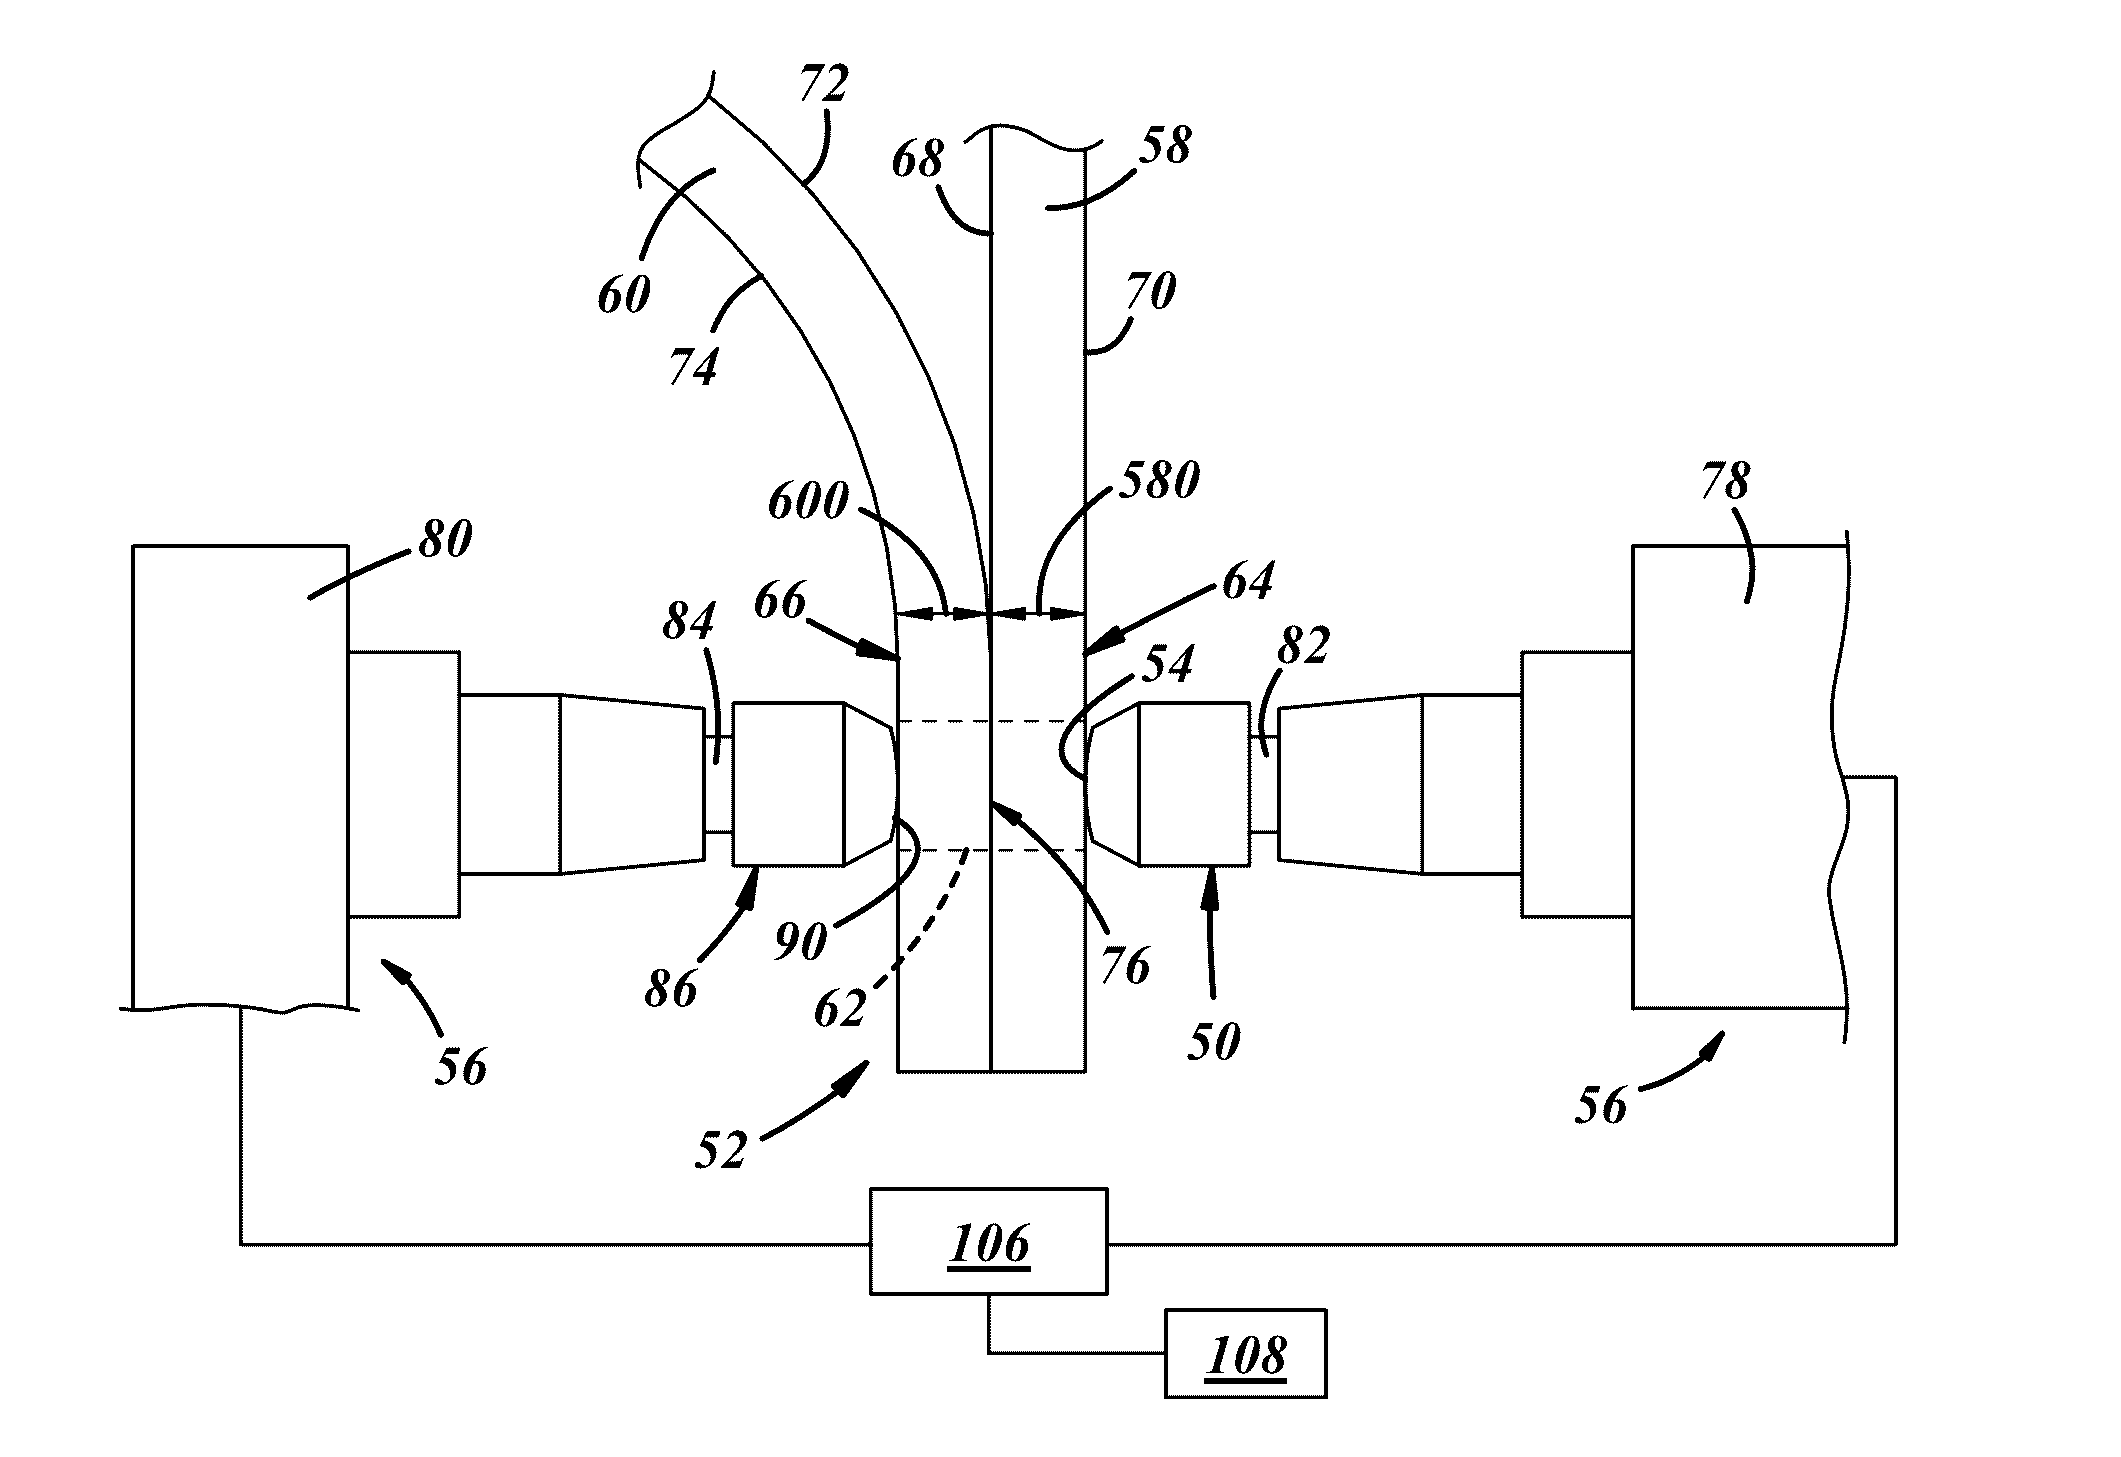 Resistive welding electrode and method for spot welding steel and aluminum alloy workpieces with the resistive welding electrode